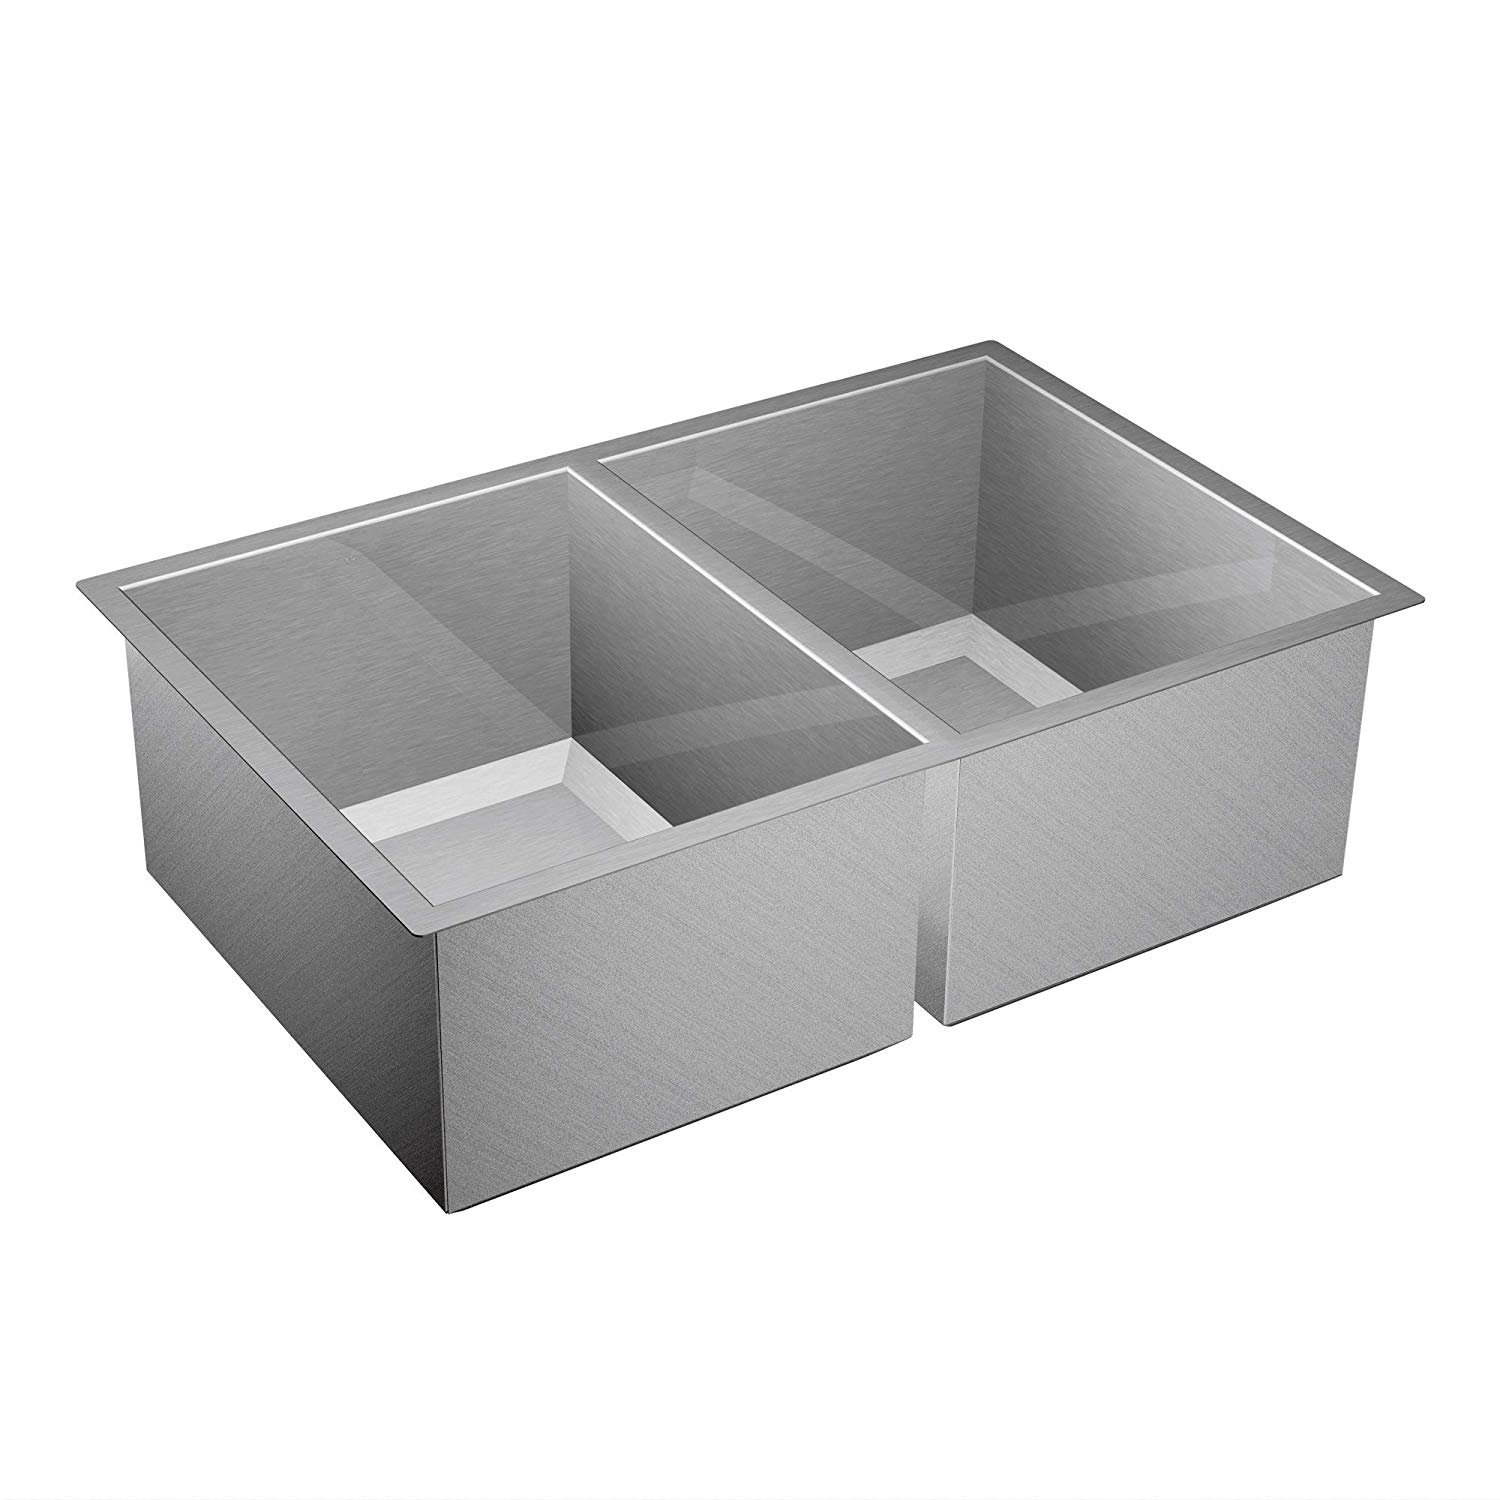 1600 Series 31x20x10" Stainless Steel Double Bowl Sink